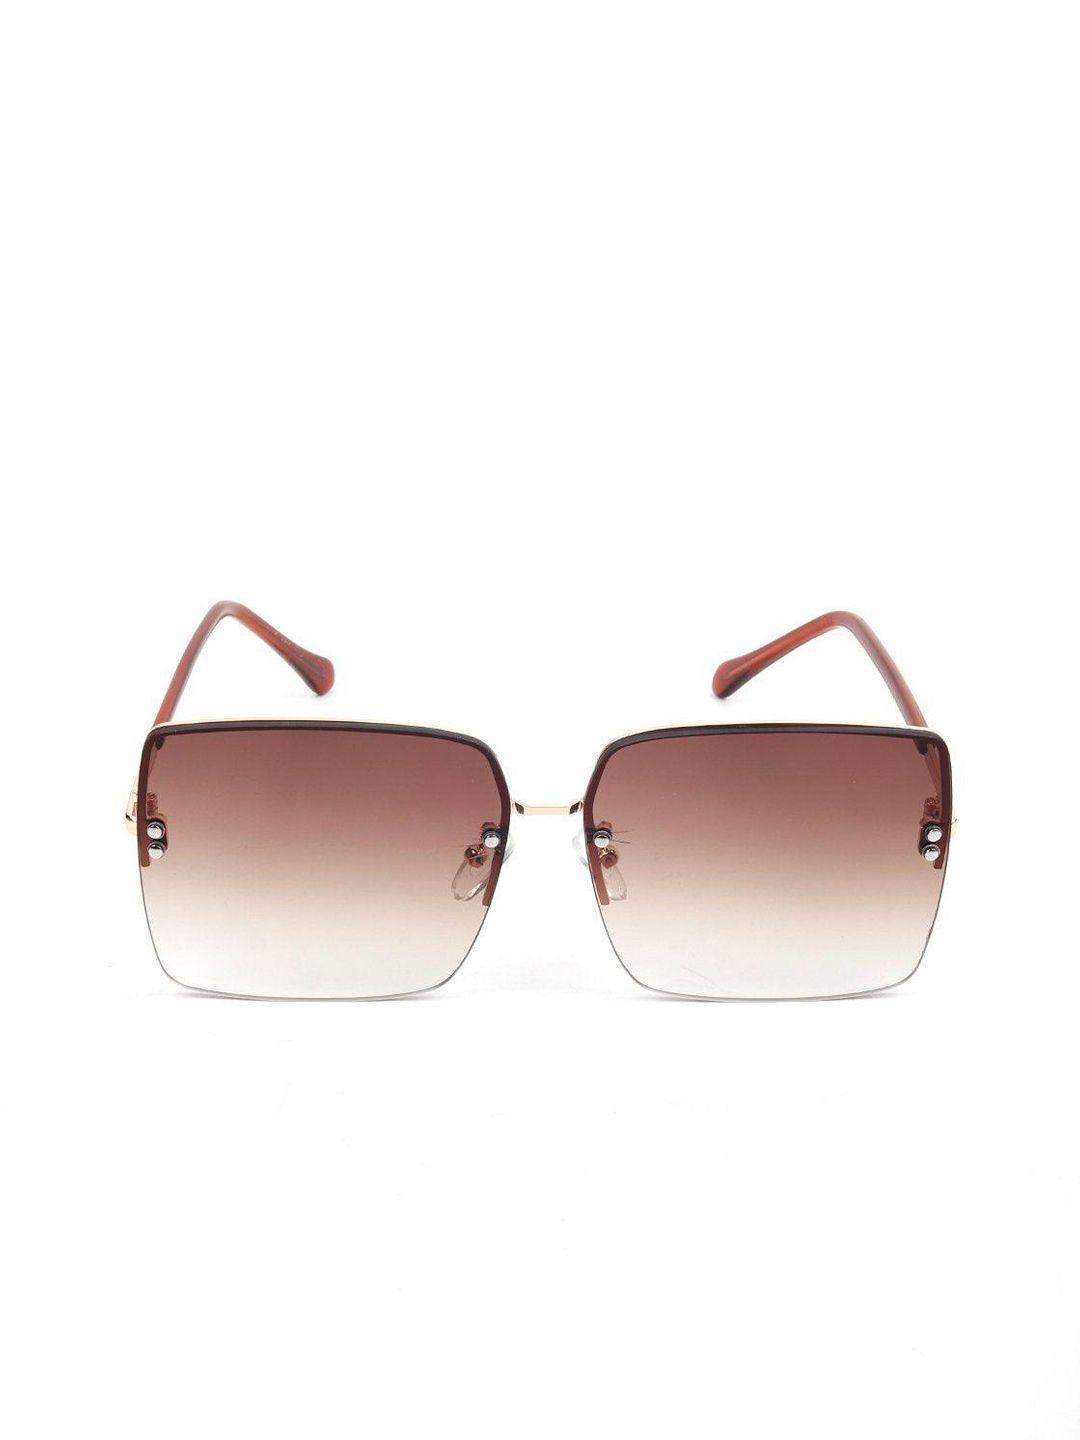 odette-women-oversized-sunglasses-with-uv-protected-lens-odt1361